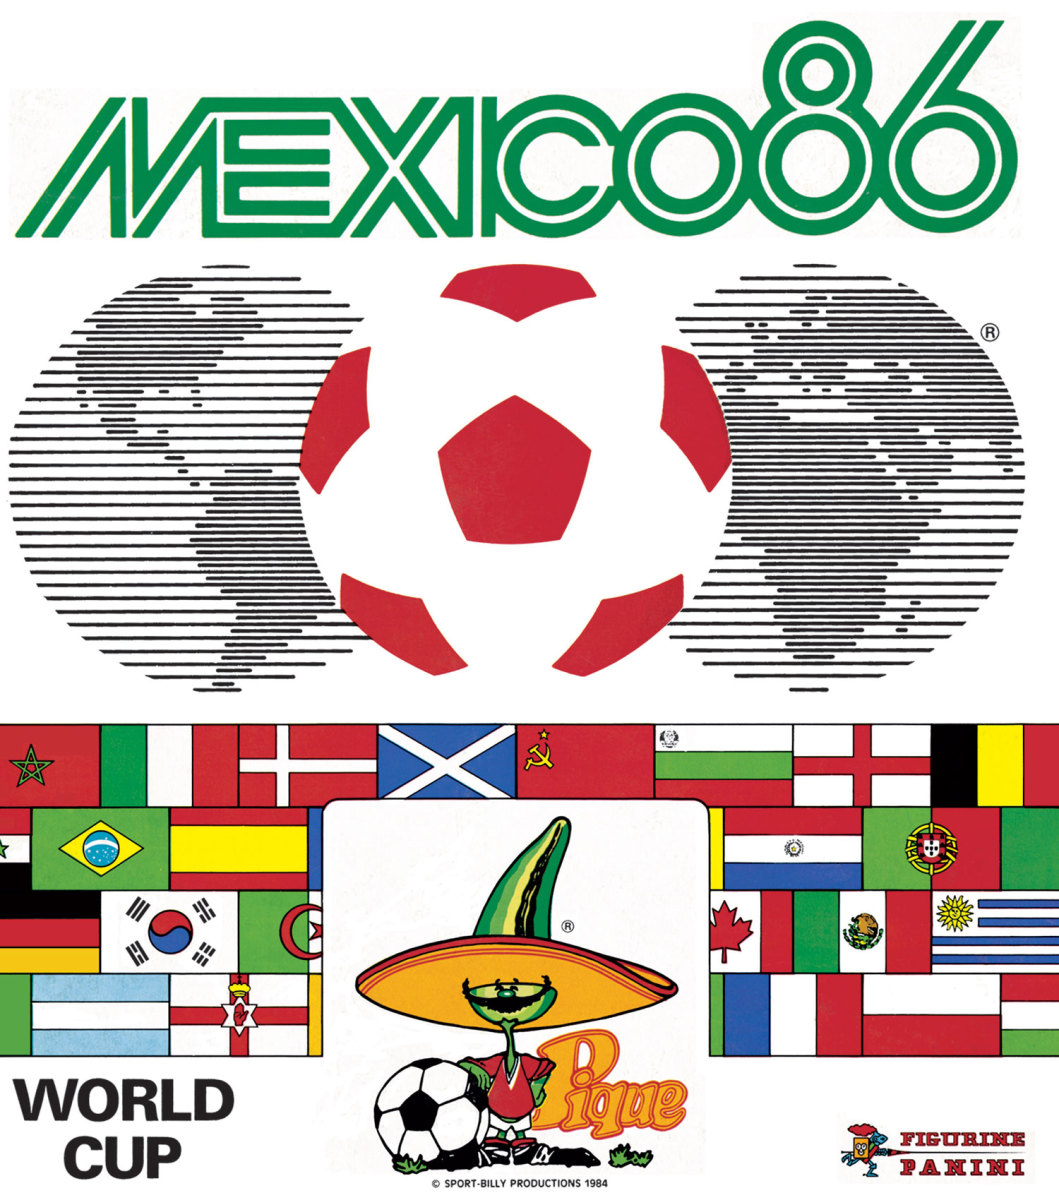 OFFICIAL Reprint LICENSED PANINI Album World Cup Mexico 86 Complete No Stickers 